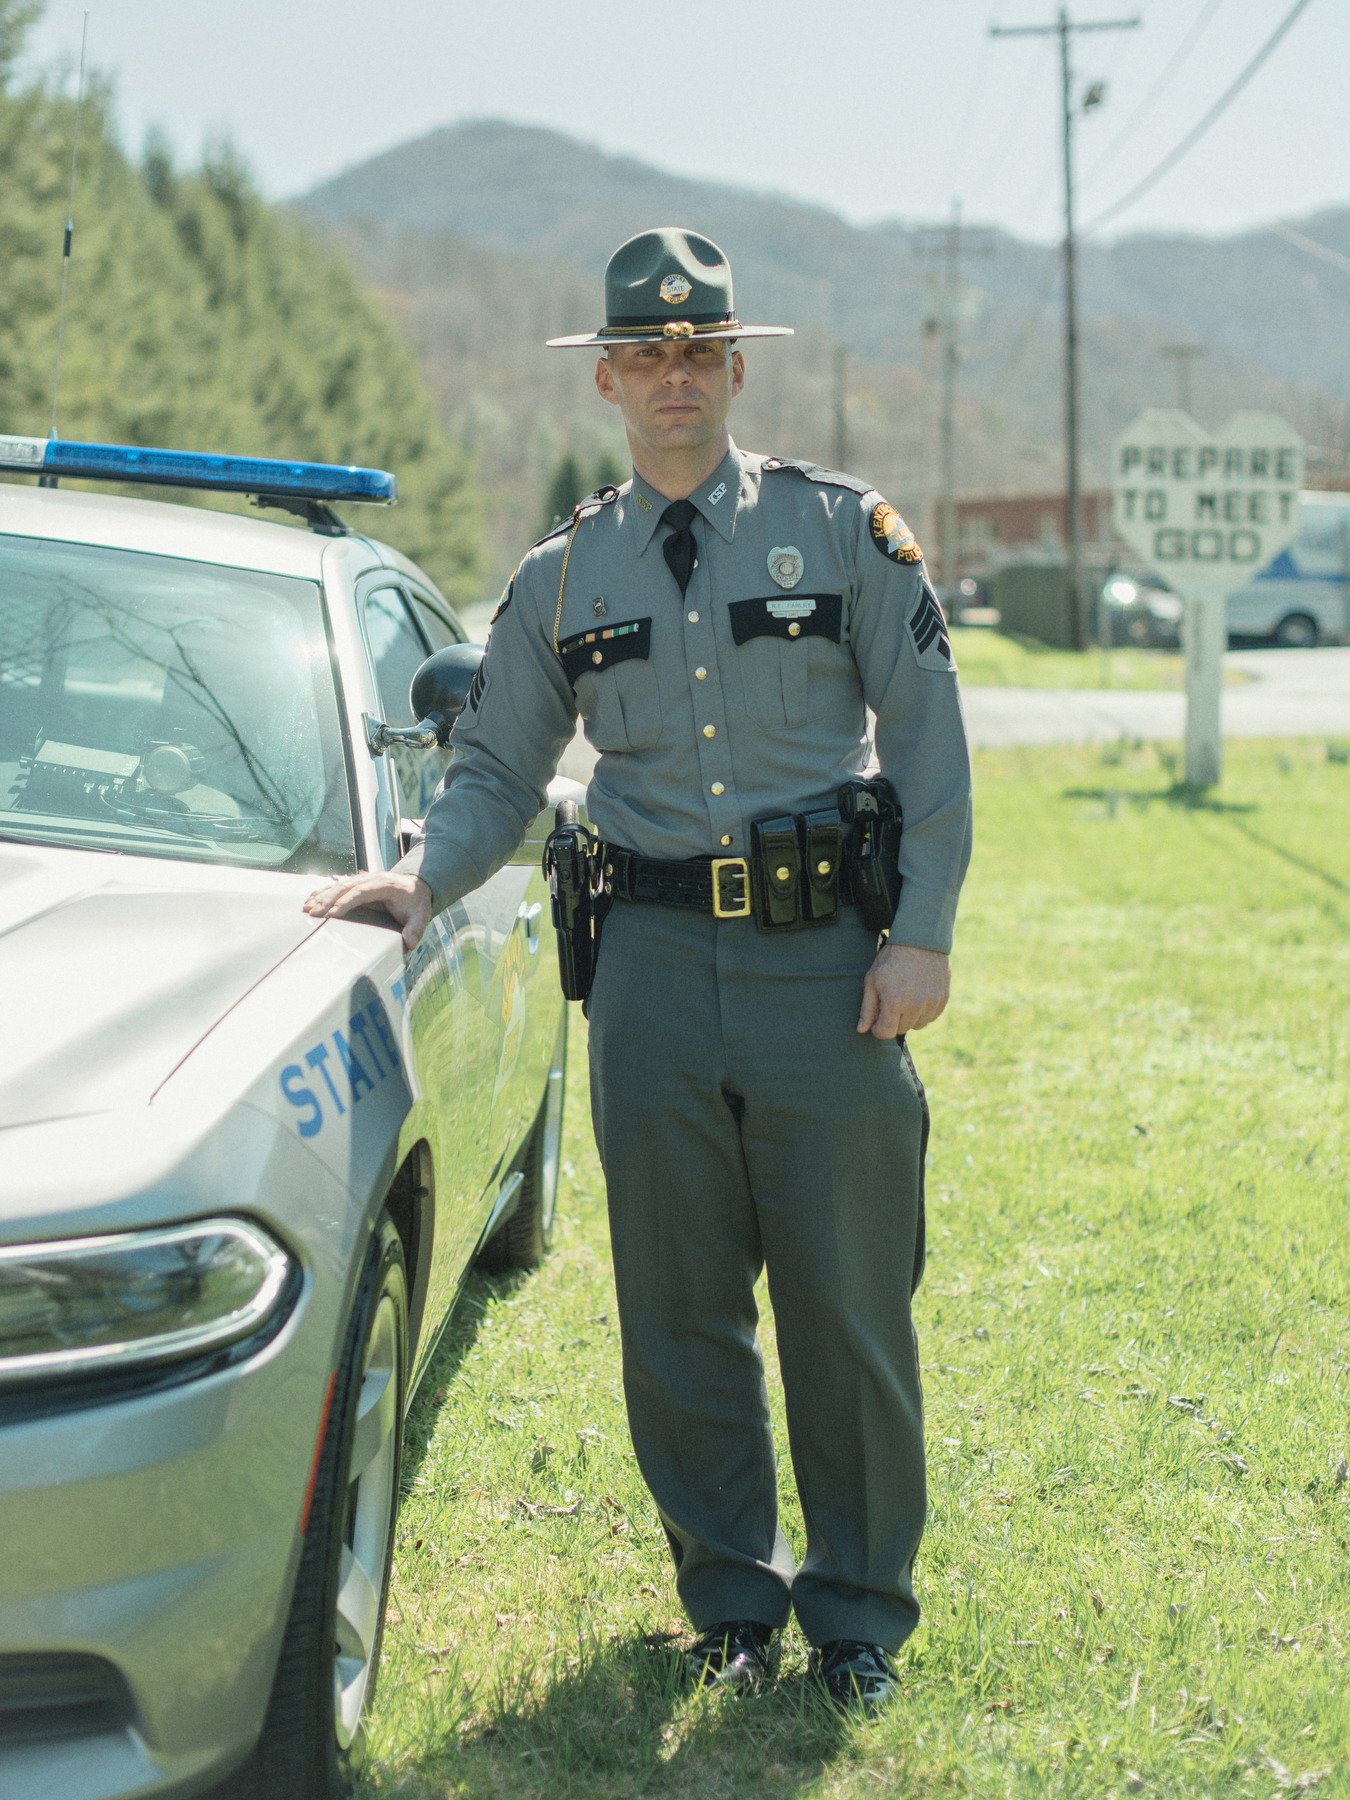 Sgt. Farley, 39, Sergeant, Kentucky State Police, Harlan, KY